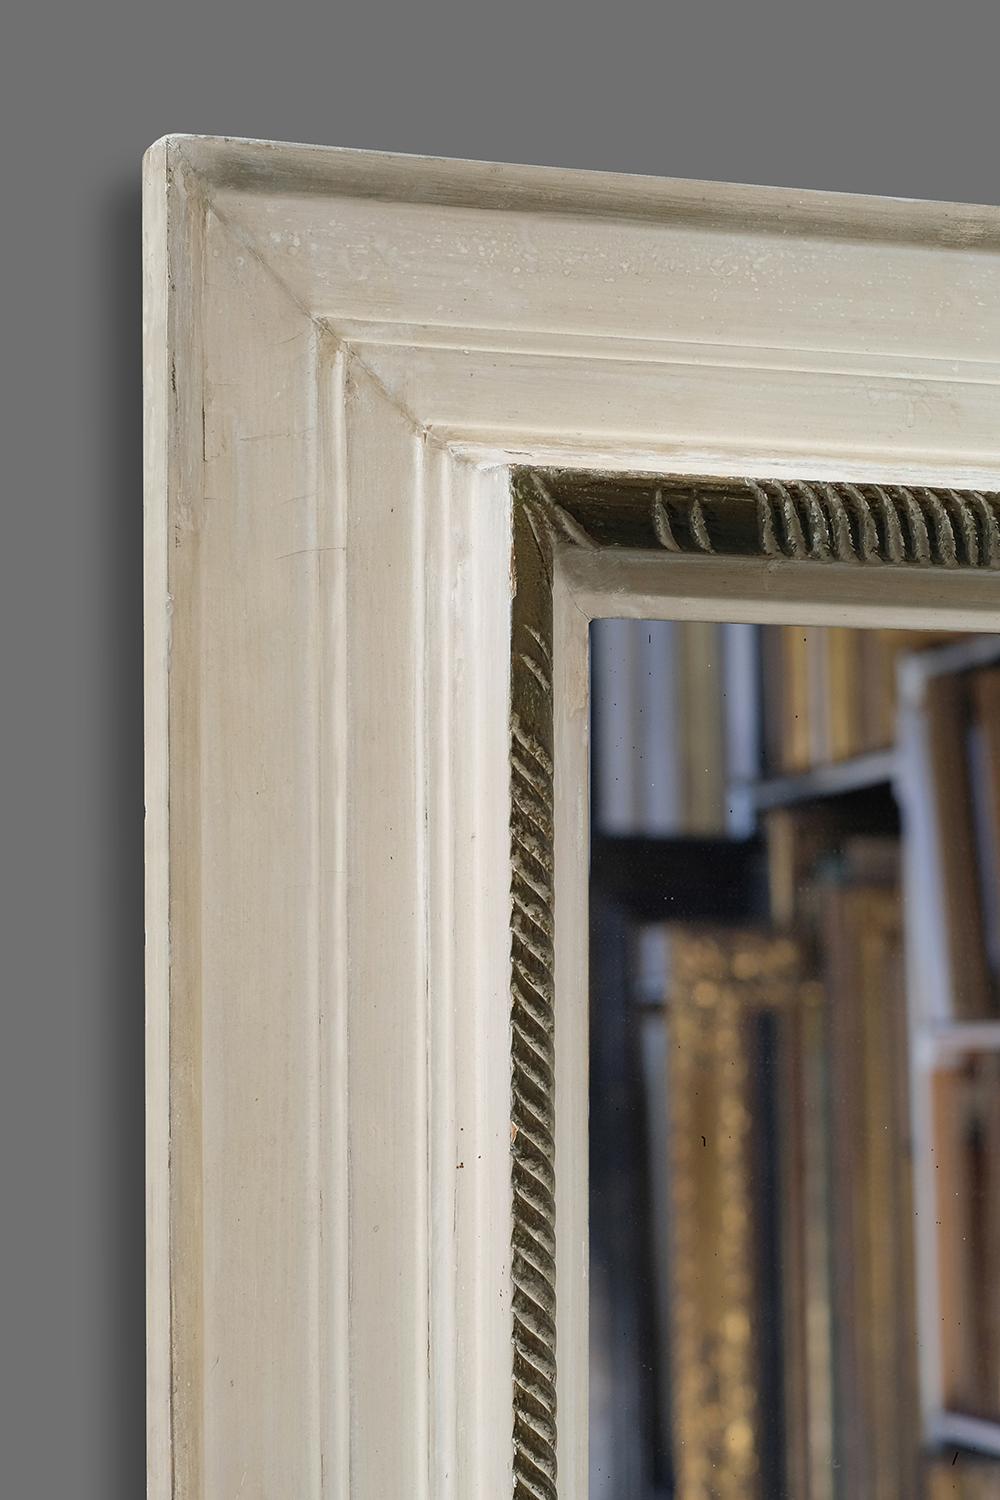 This is a striking 1st quarter 20th century hand carved French artist's frame. It has an architrave profile with torus and a carved centered wave molding adjacent to sight edge. The frame retains its original white paint and stained rail. Further